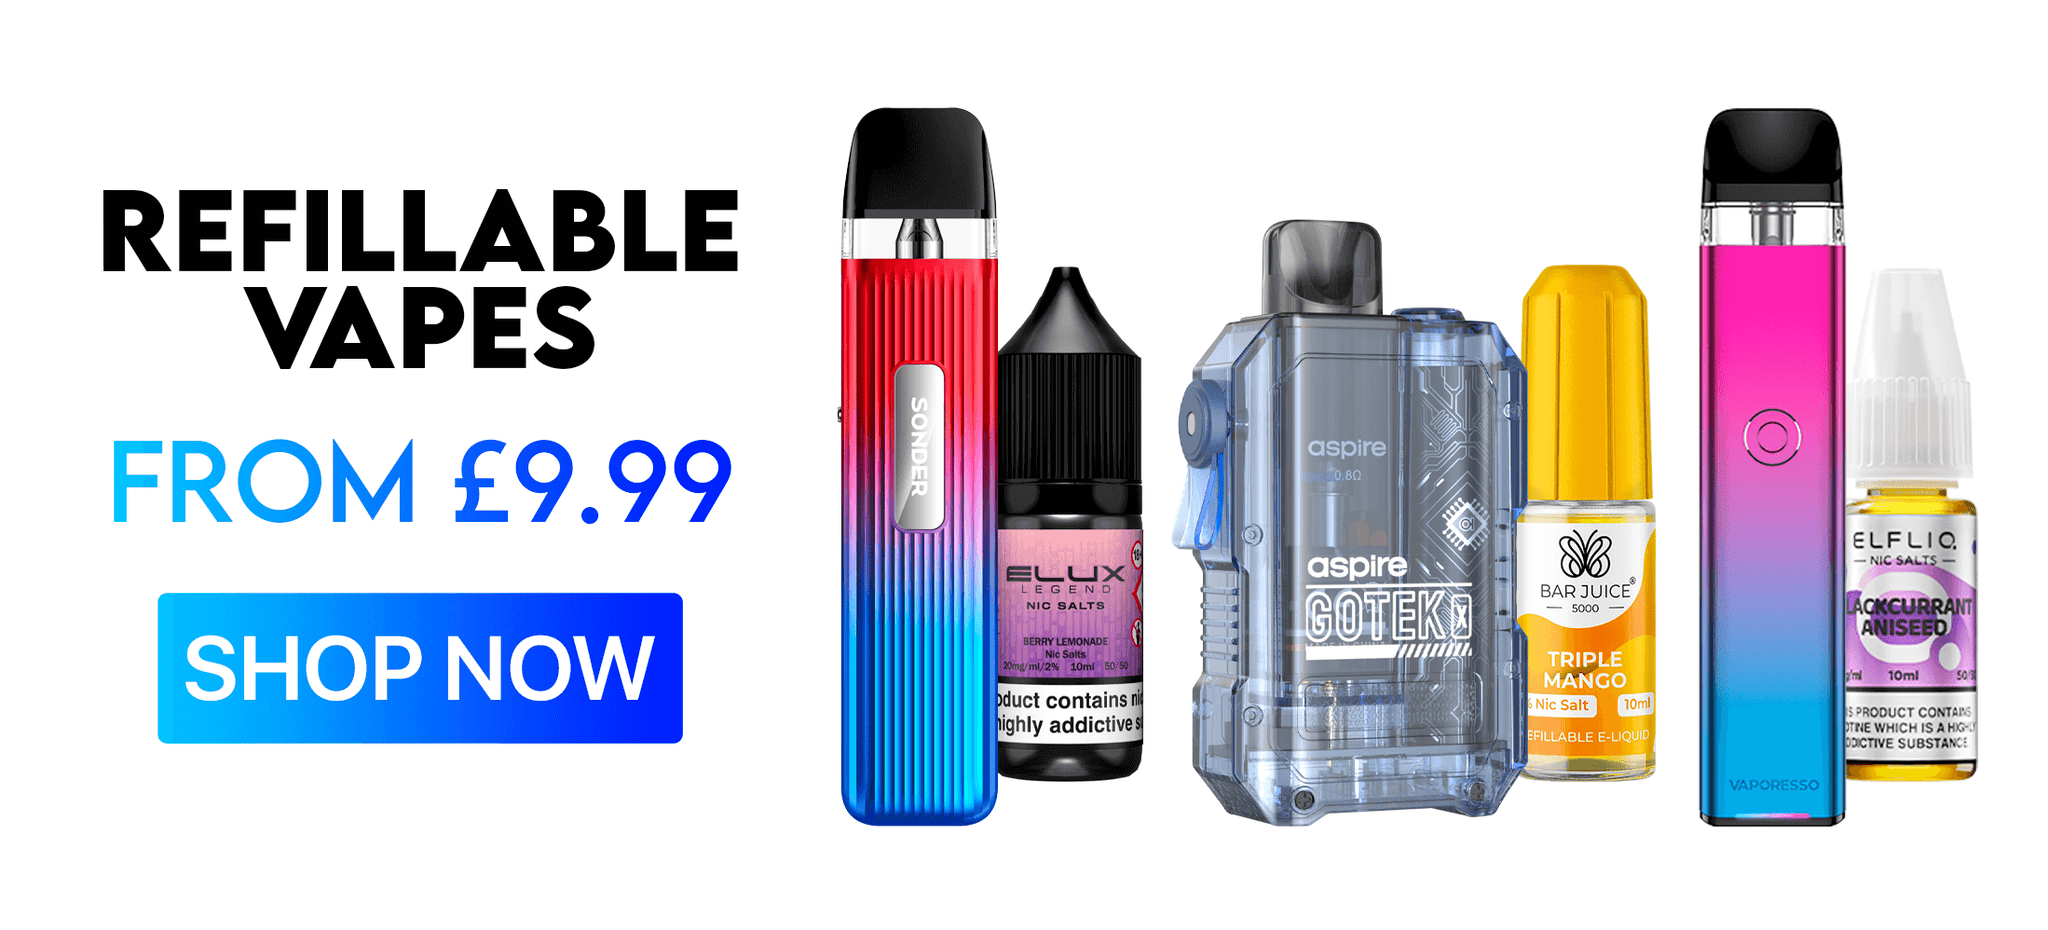 Refillable Vapes from £9.99. Shop Now